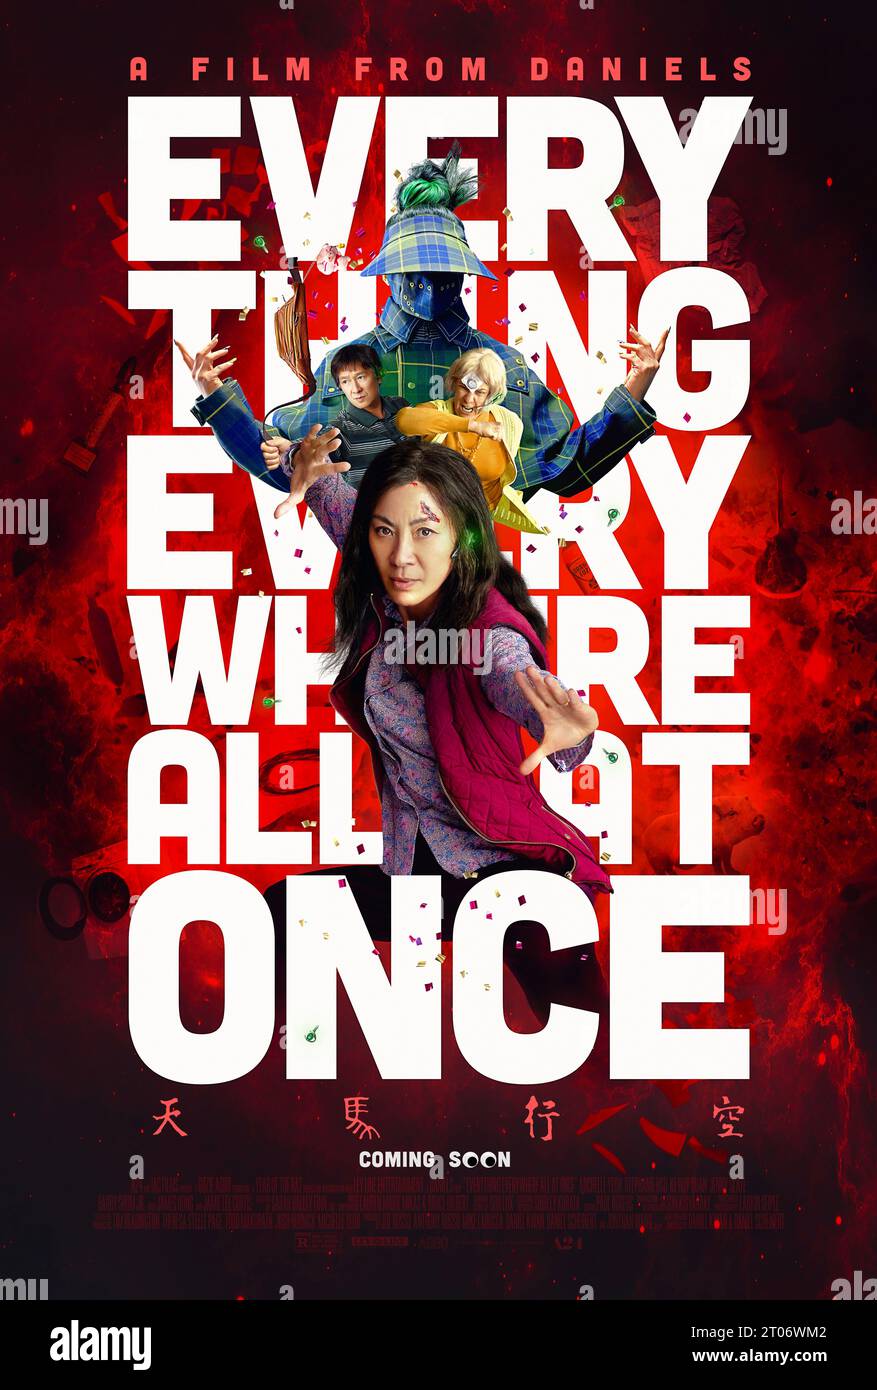 Everything Everywhere All at Once (2022) directed by Daniel Kwan and Daniel Scheinert and starring Michelle Yeoh, Stephanie Hsu and Jamie Lee Curtis. Oscar winning comedy about a middle-aged Chinese immigrant is swept up into an insane adventure in which she alone can save existence by exploring other universes and connecting with the lives she could have led. US advance poster.***EDITORIAL USE ONLY*** Credit: BFA / A24 Stock Photo